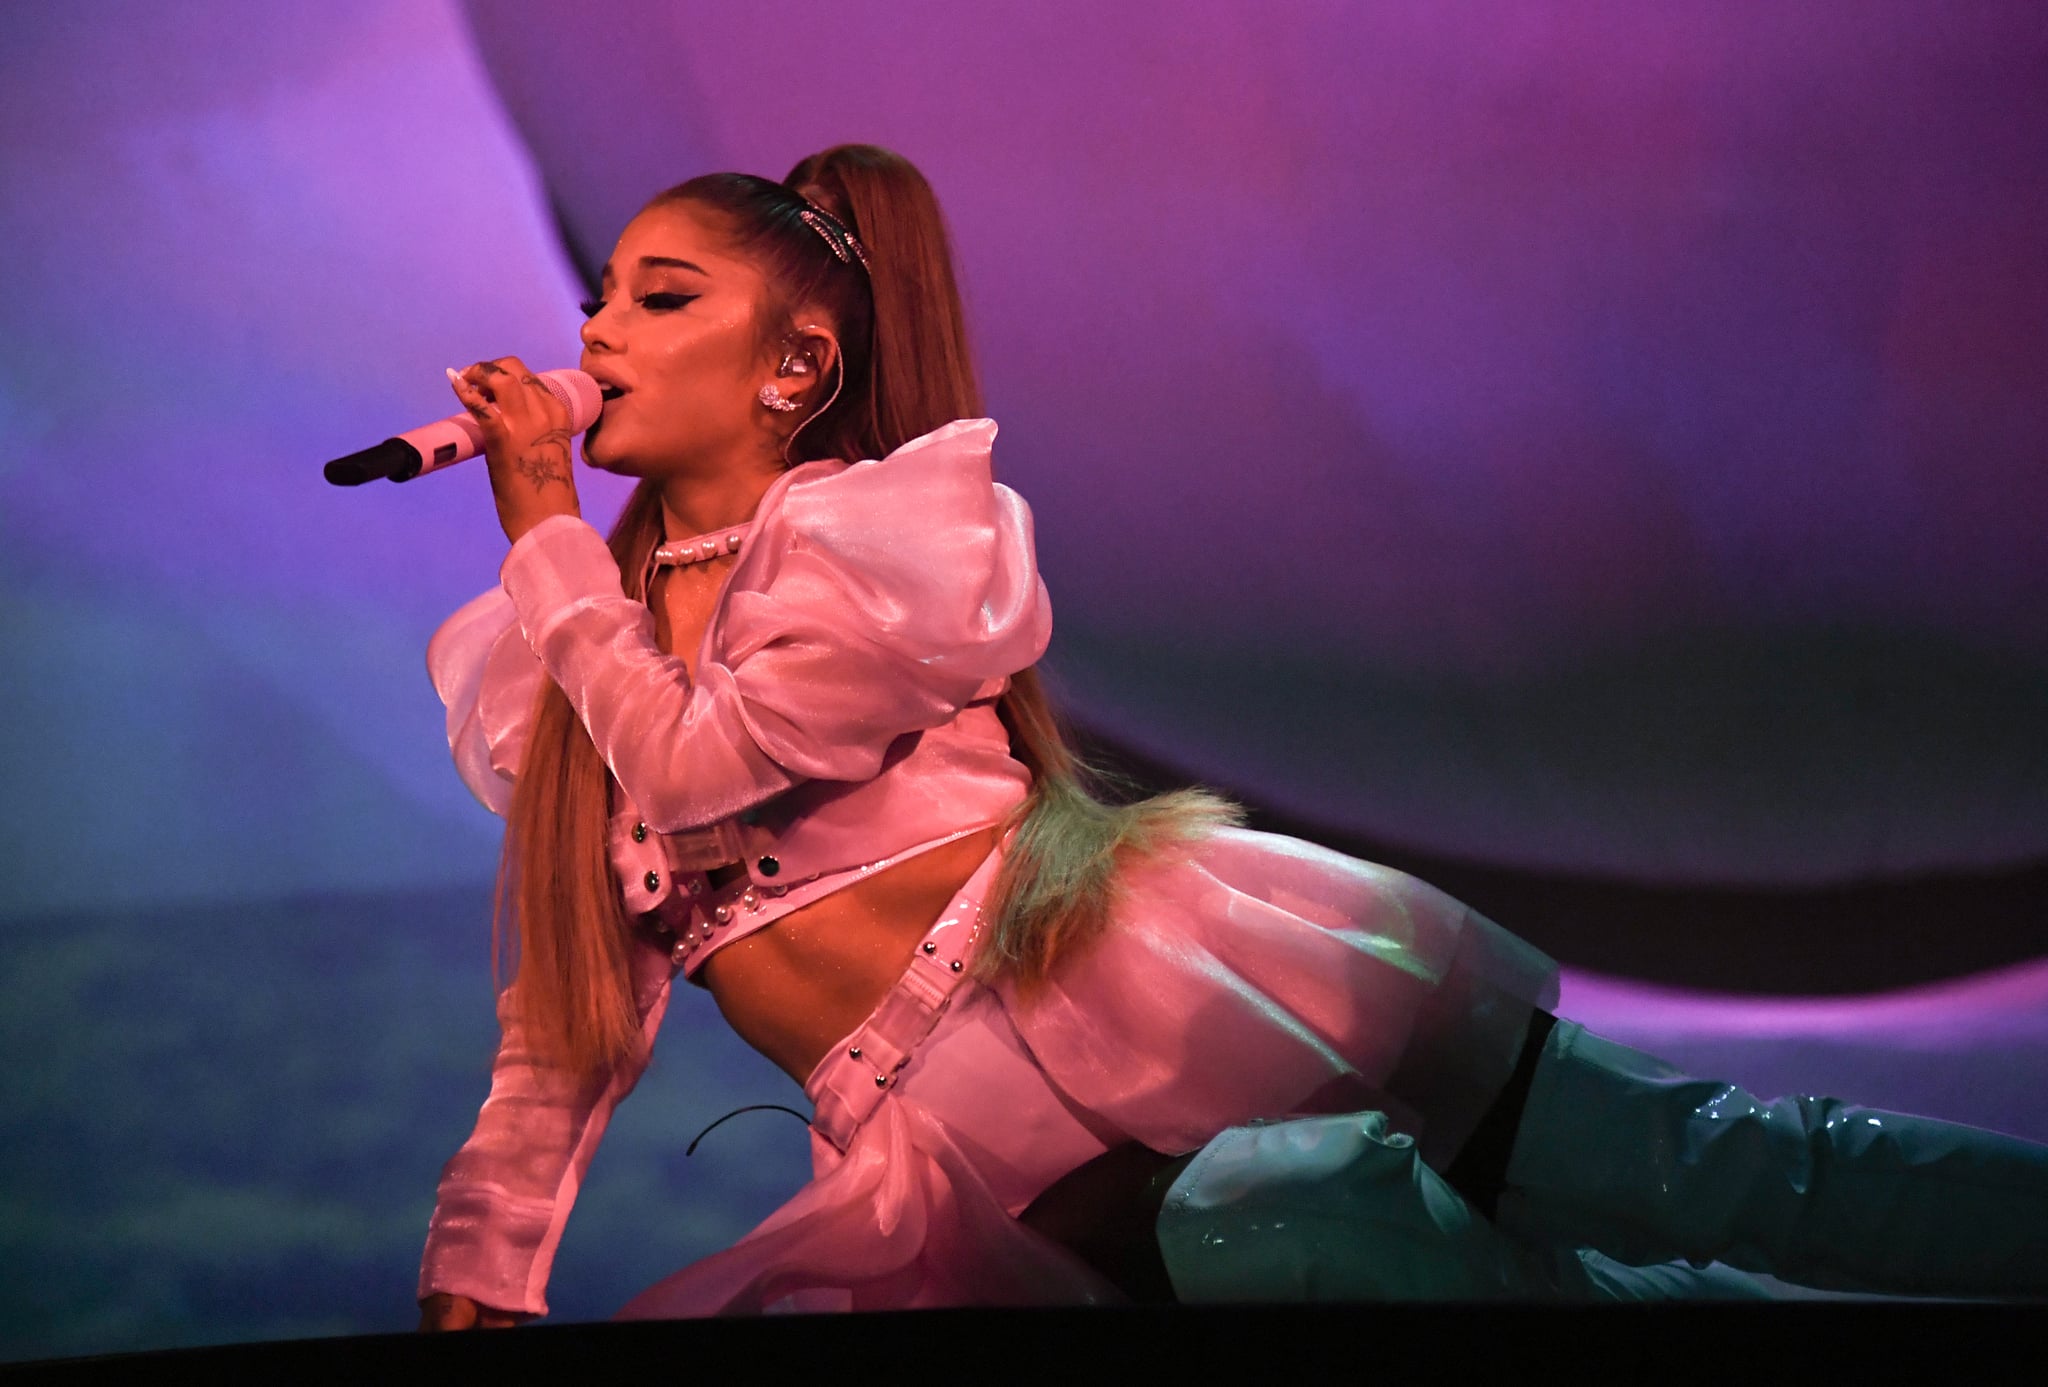 LONDON, ENGLAND - AUGUST 17: Ariana Grande performs on stage during her 